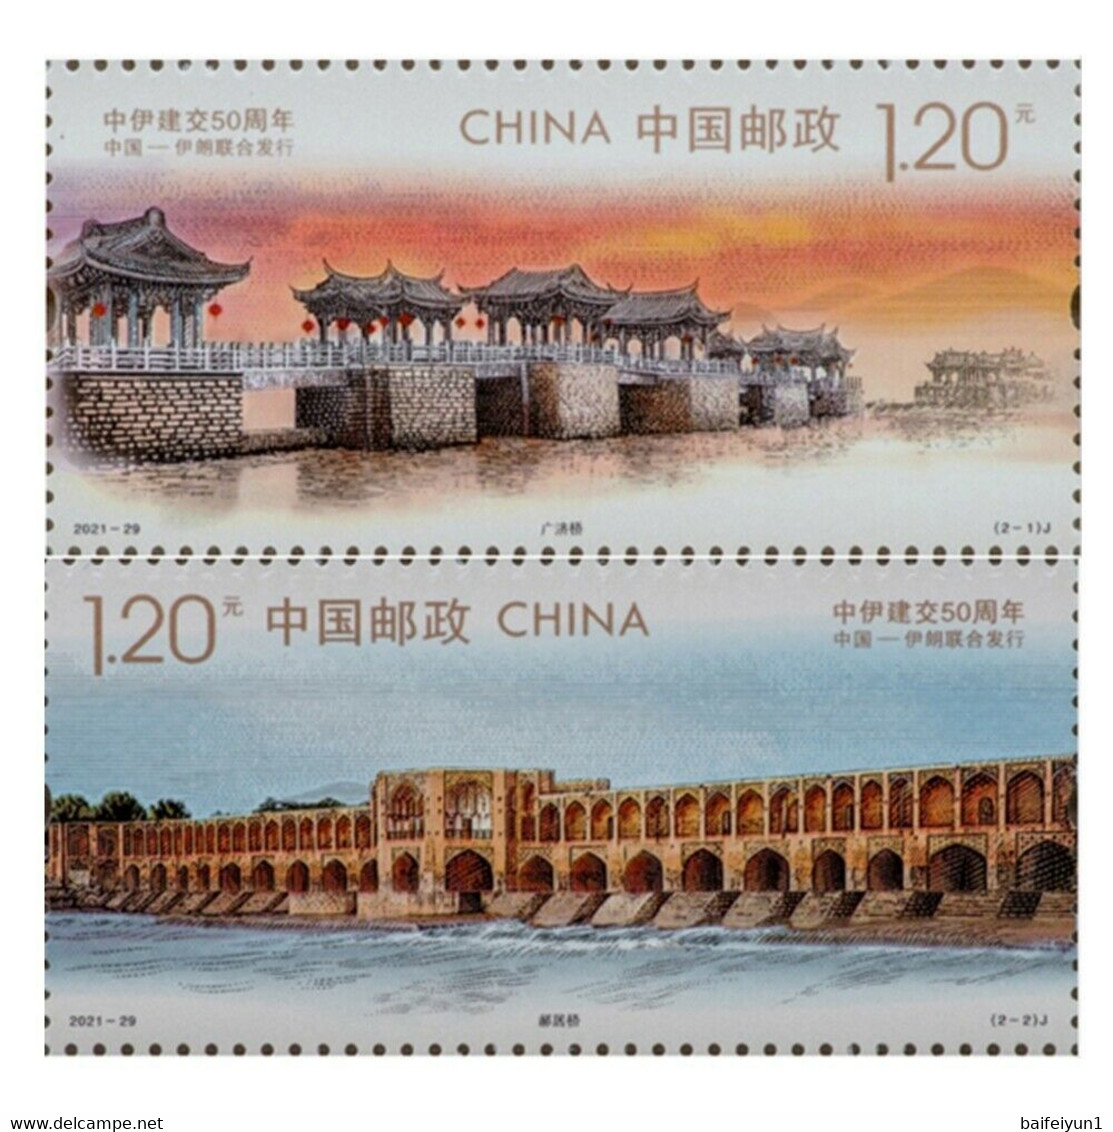 CHINA 2021-1 - 2021-29  Whole Year of Ox  Full Stamp Year set(Not inlude the album)